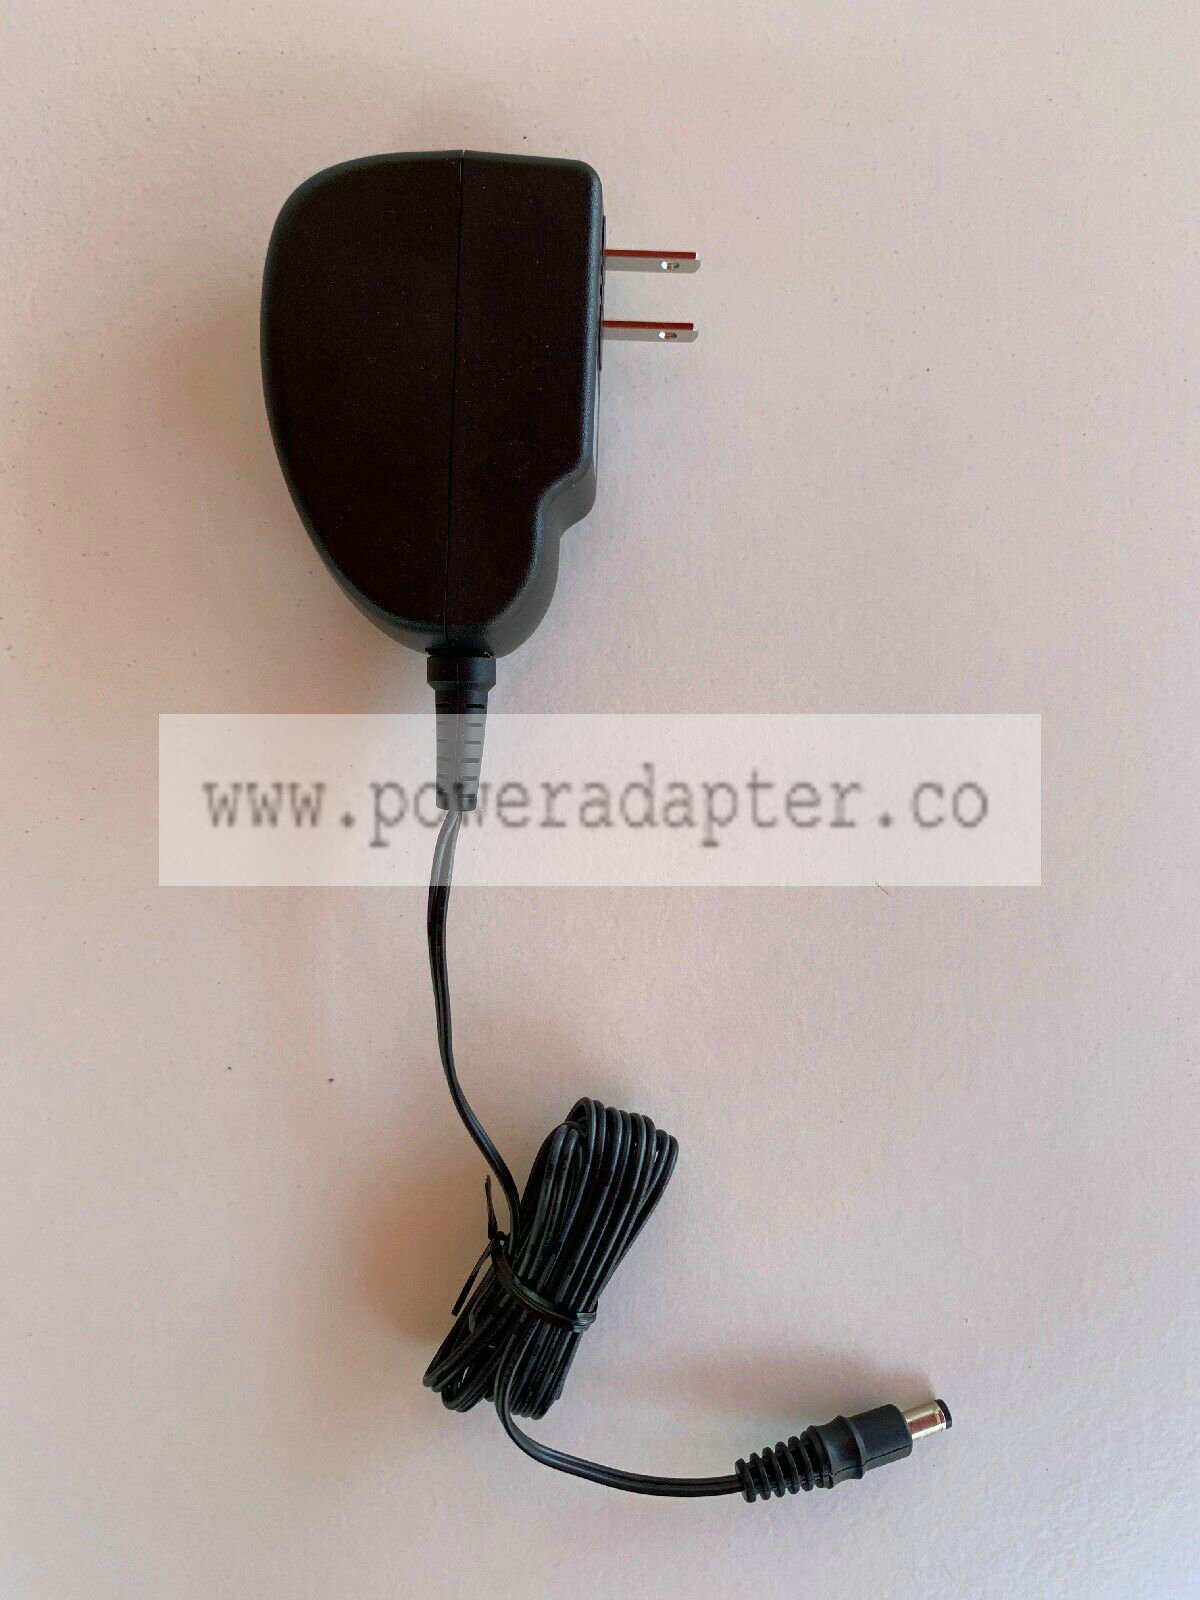 APD Asian Power Devices Adapter WB-18B12FU 100 120v 12v APD Asian Power Devices Adapter WB-18B12FU 100 120v 12v. Cond